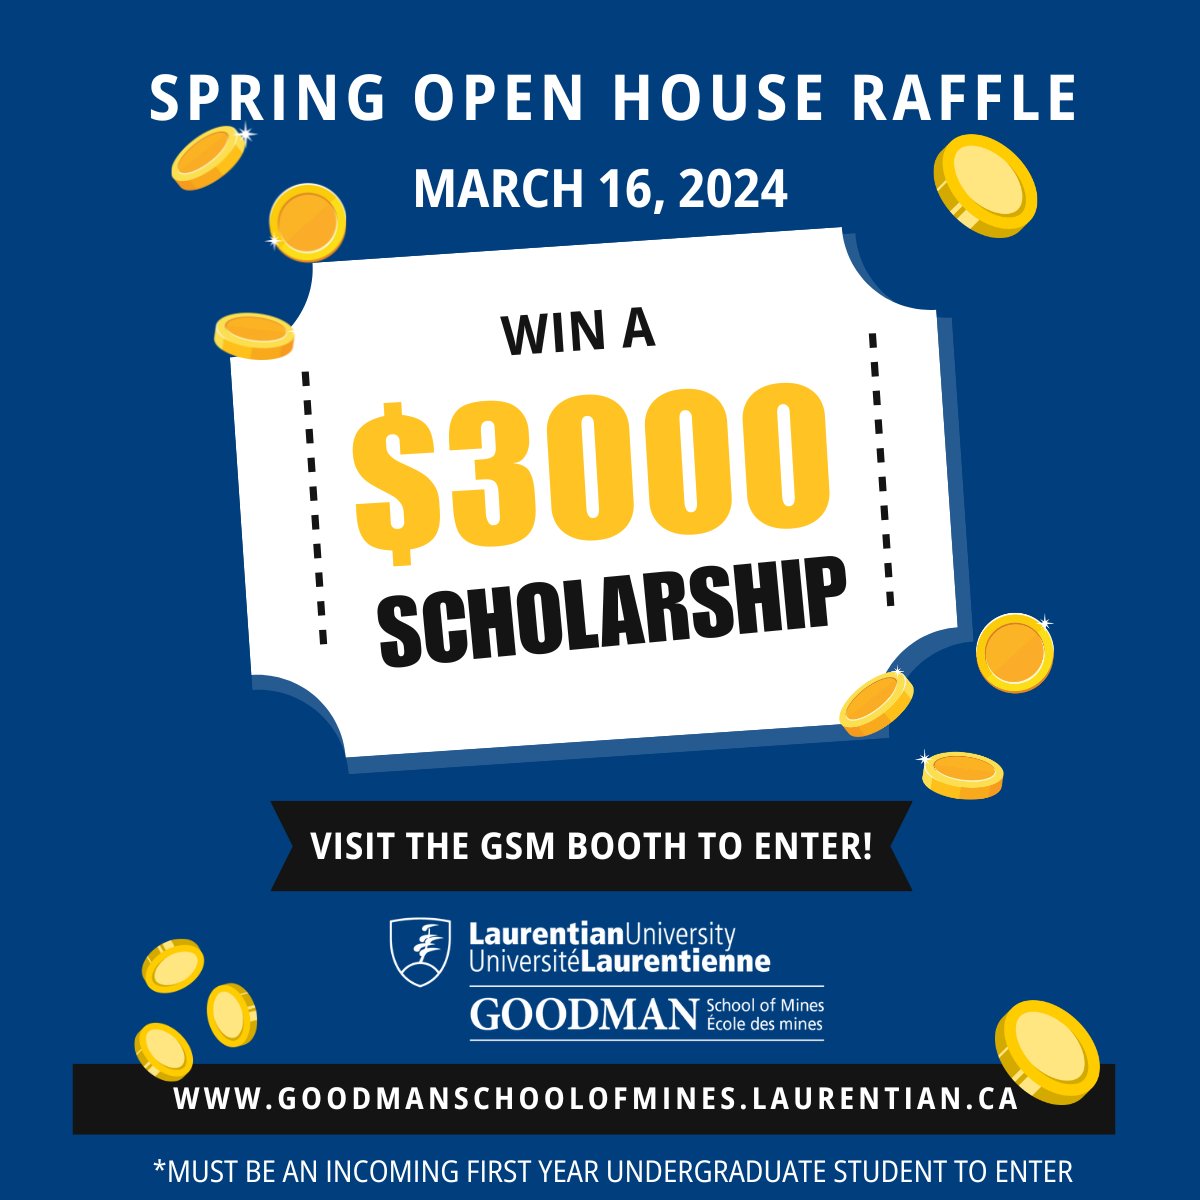 Visit us at the Spring Open House @LaurentianU this Saturday and enter for the chance to WIN a $3000 Scholarship! 🎉 Details below 👇